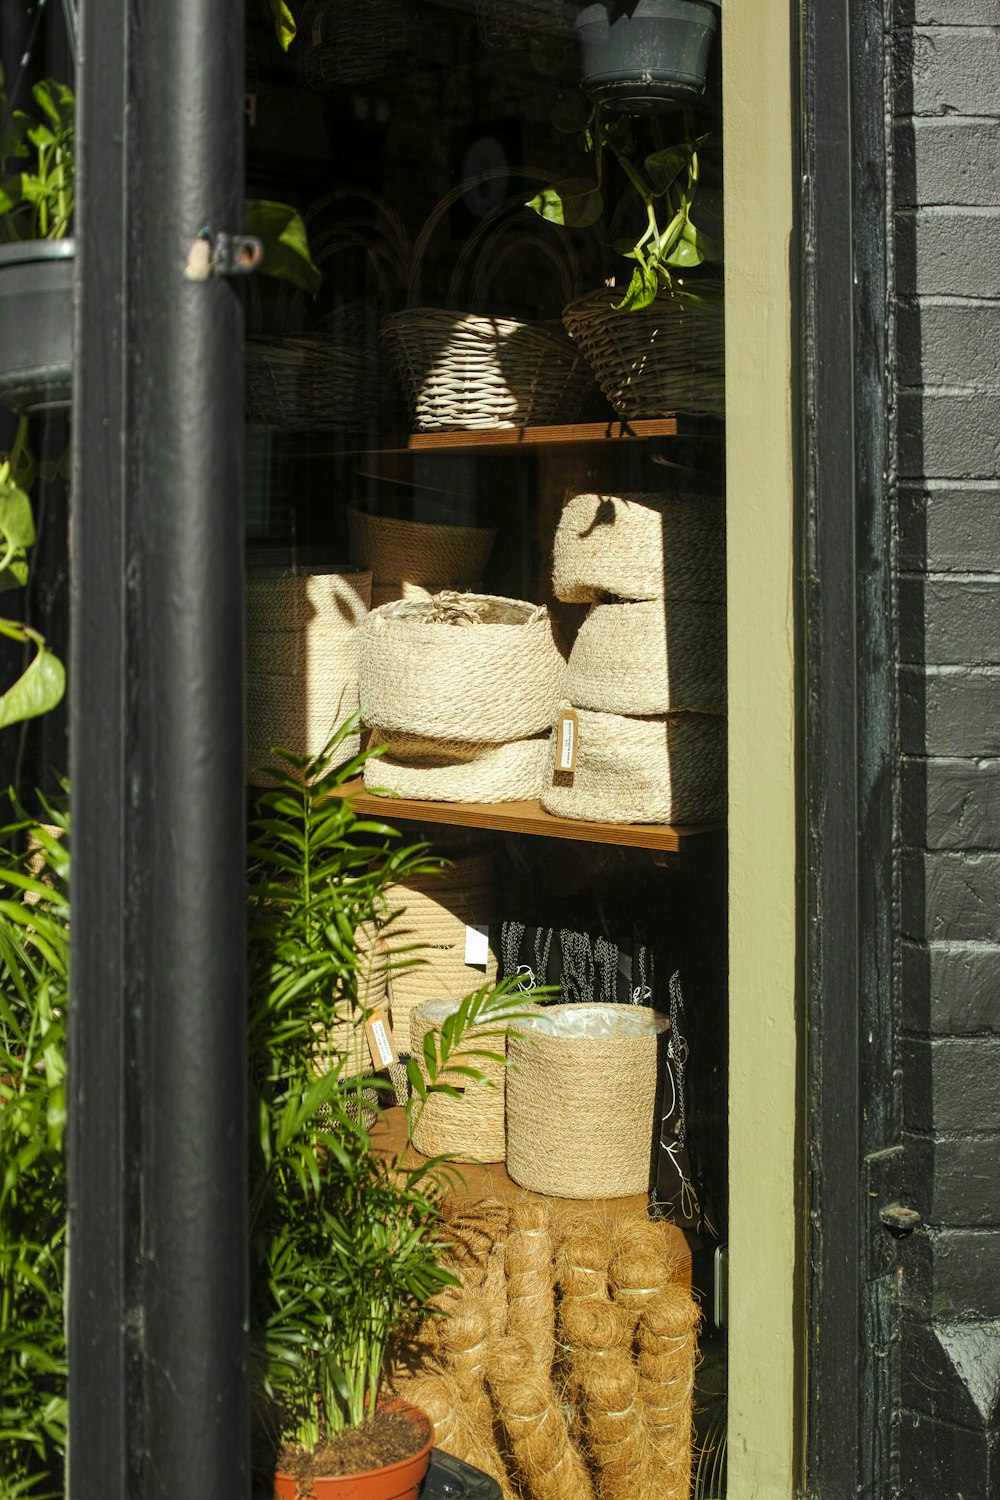 a shelf filled with baskets and plants in front of a window